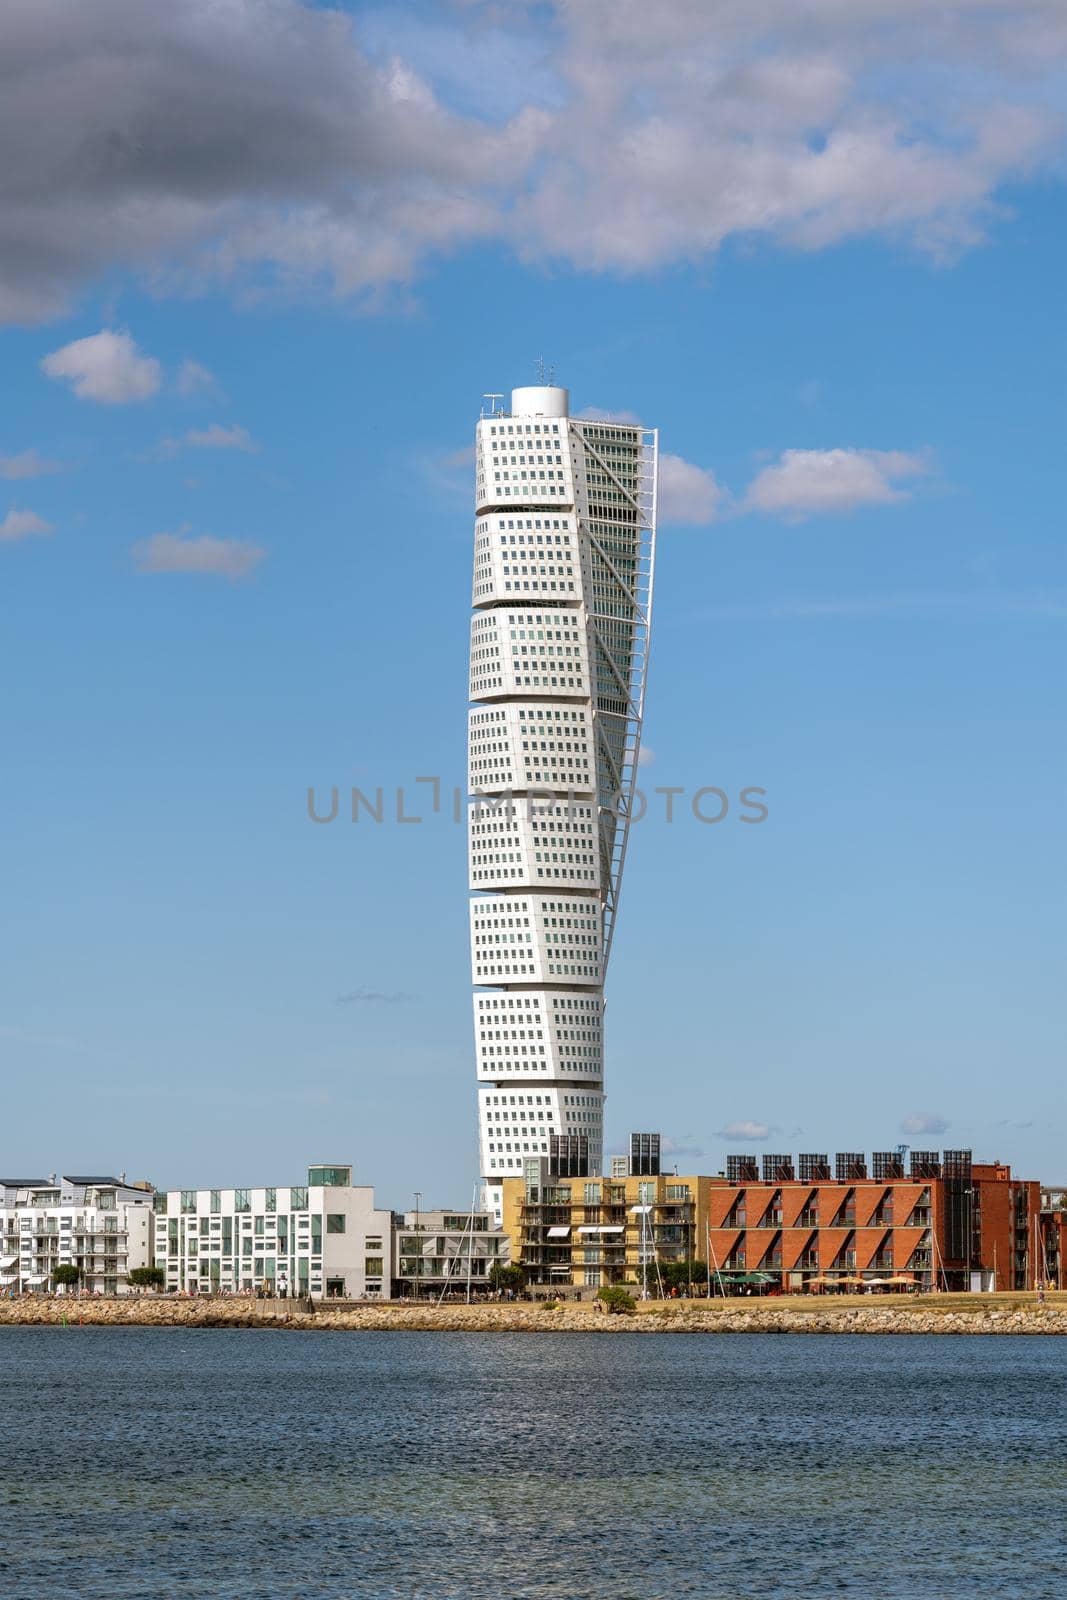 The iconic Turning Torso in Malmo by elxeneize